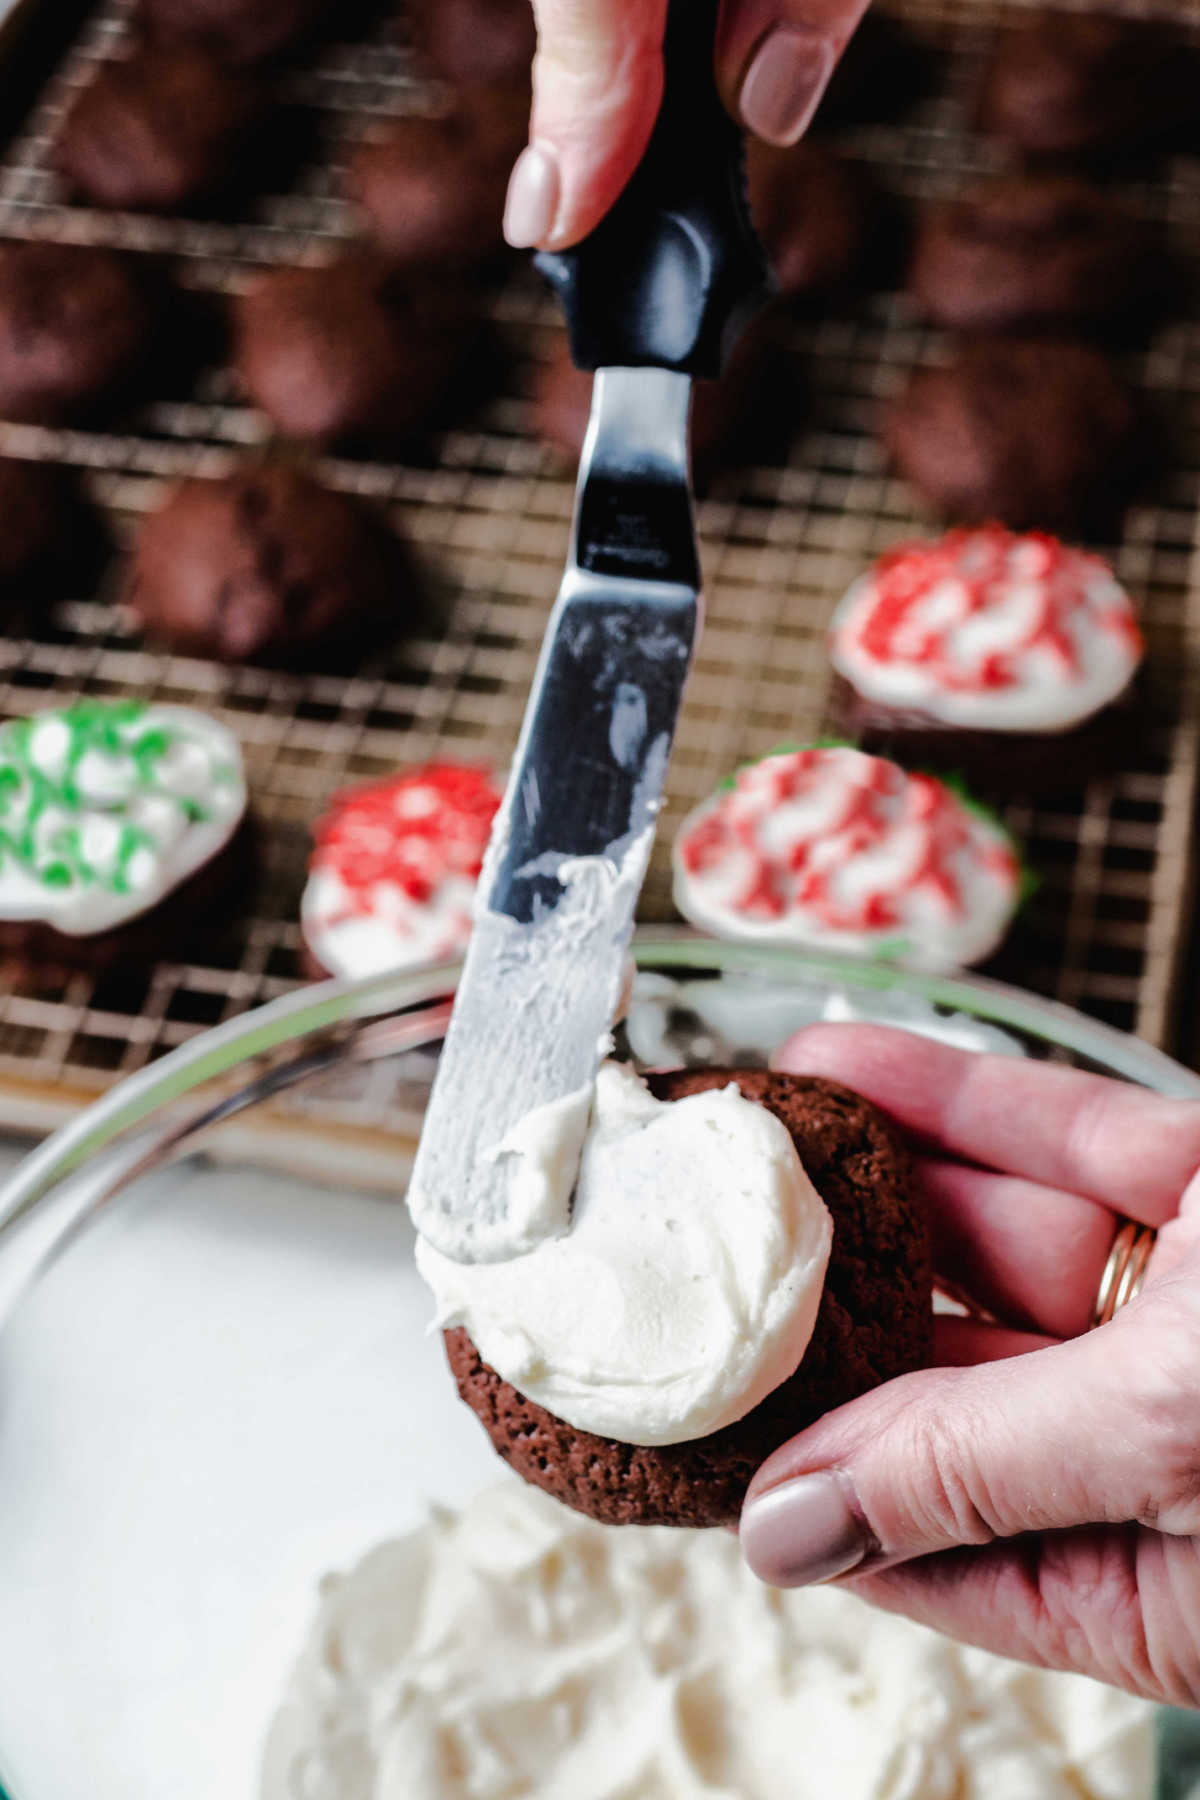 using a spatula to spread frosting on a chocolate drop cookie.